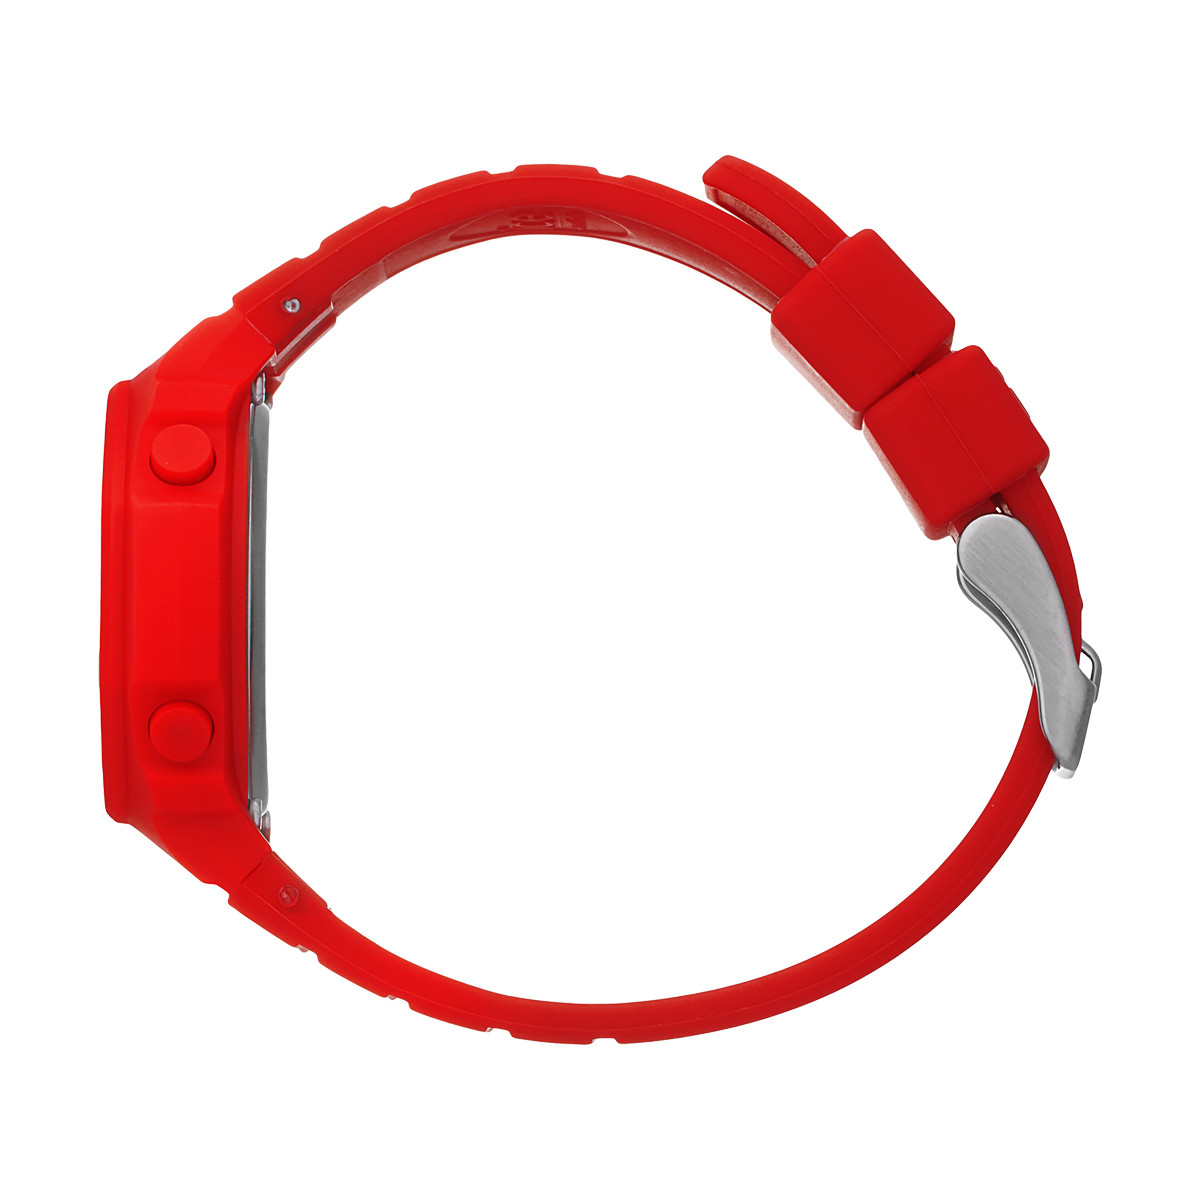 Montre ICE WATCH ice digit ultra femme bracelet silicone rouge - vue 2